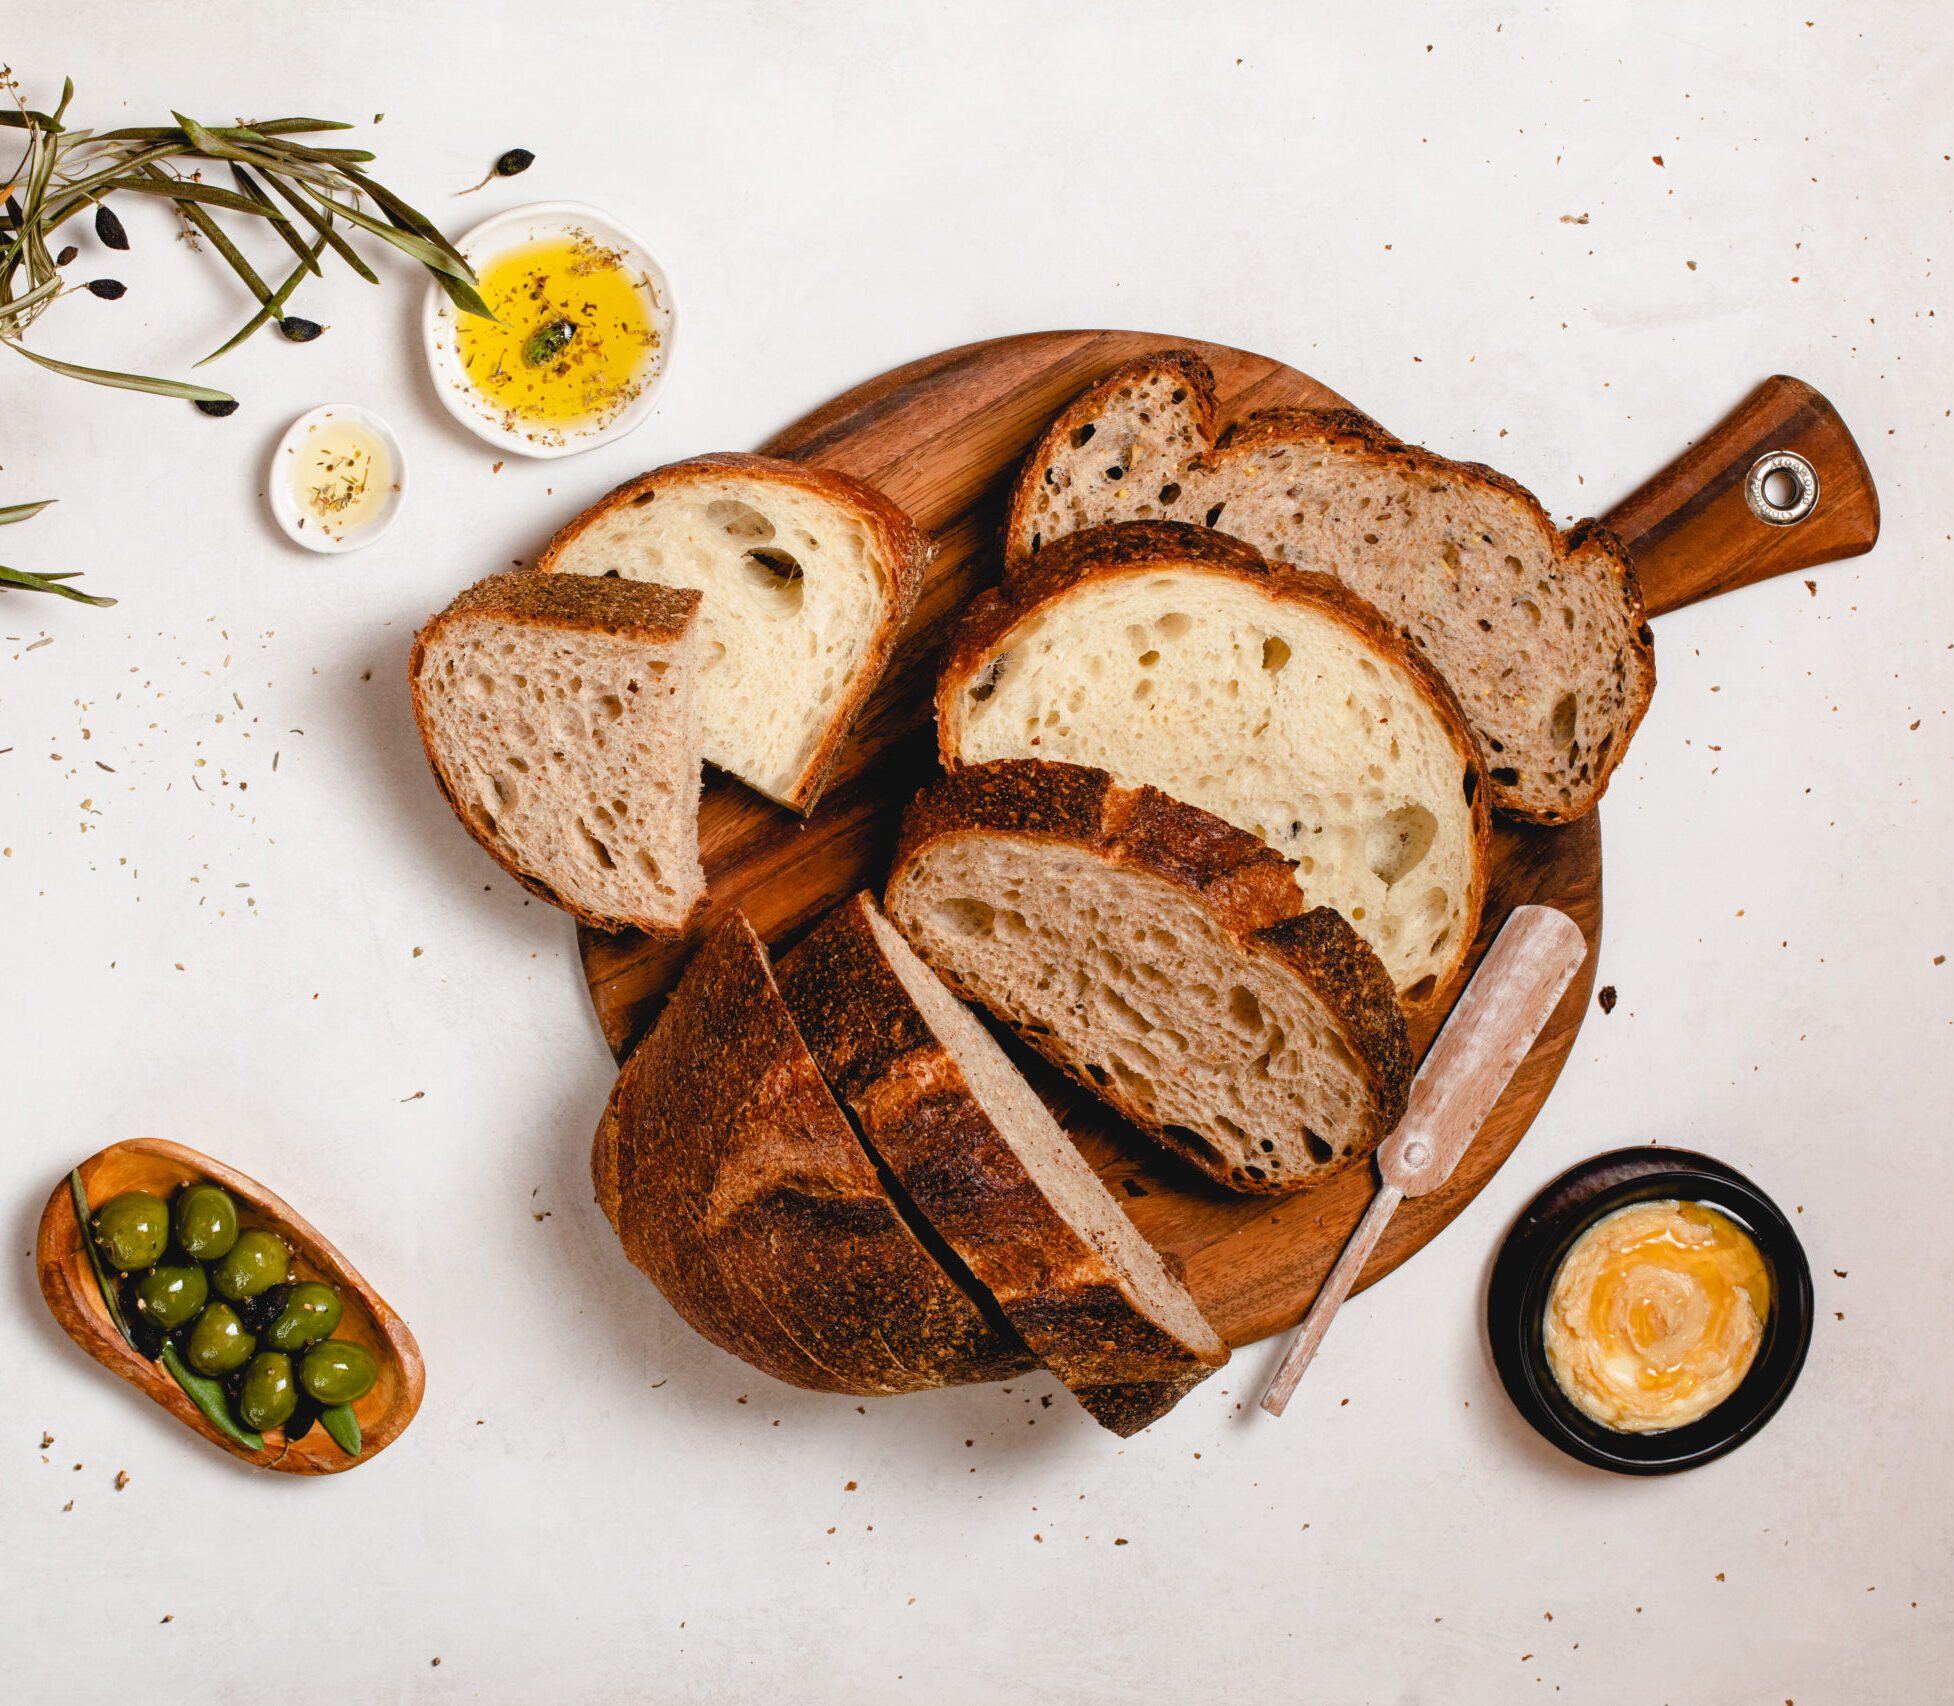 sliced loaf of bread on cutting board with herbs, olives, knife and melted butter